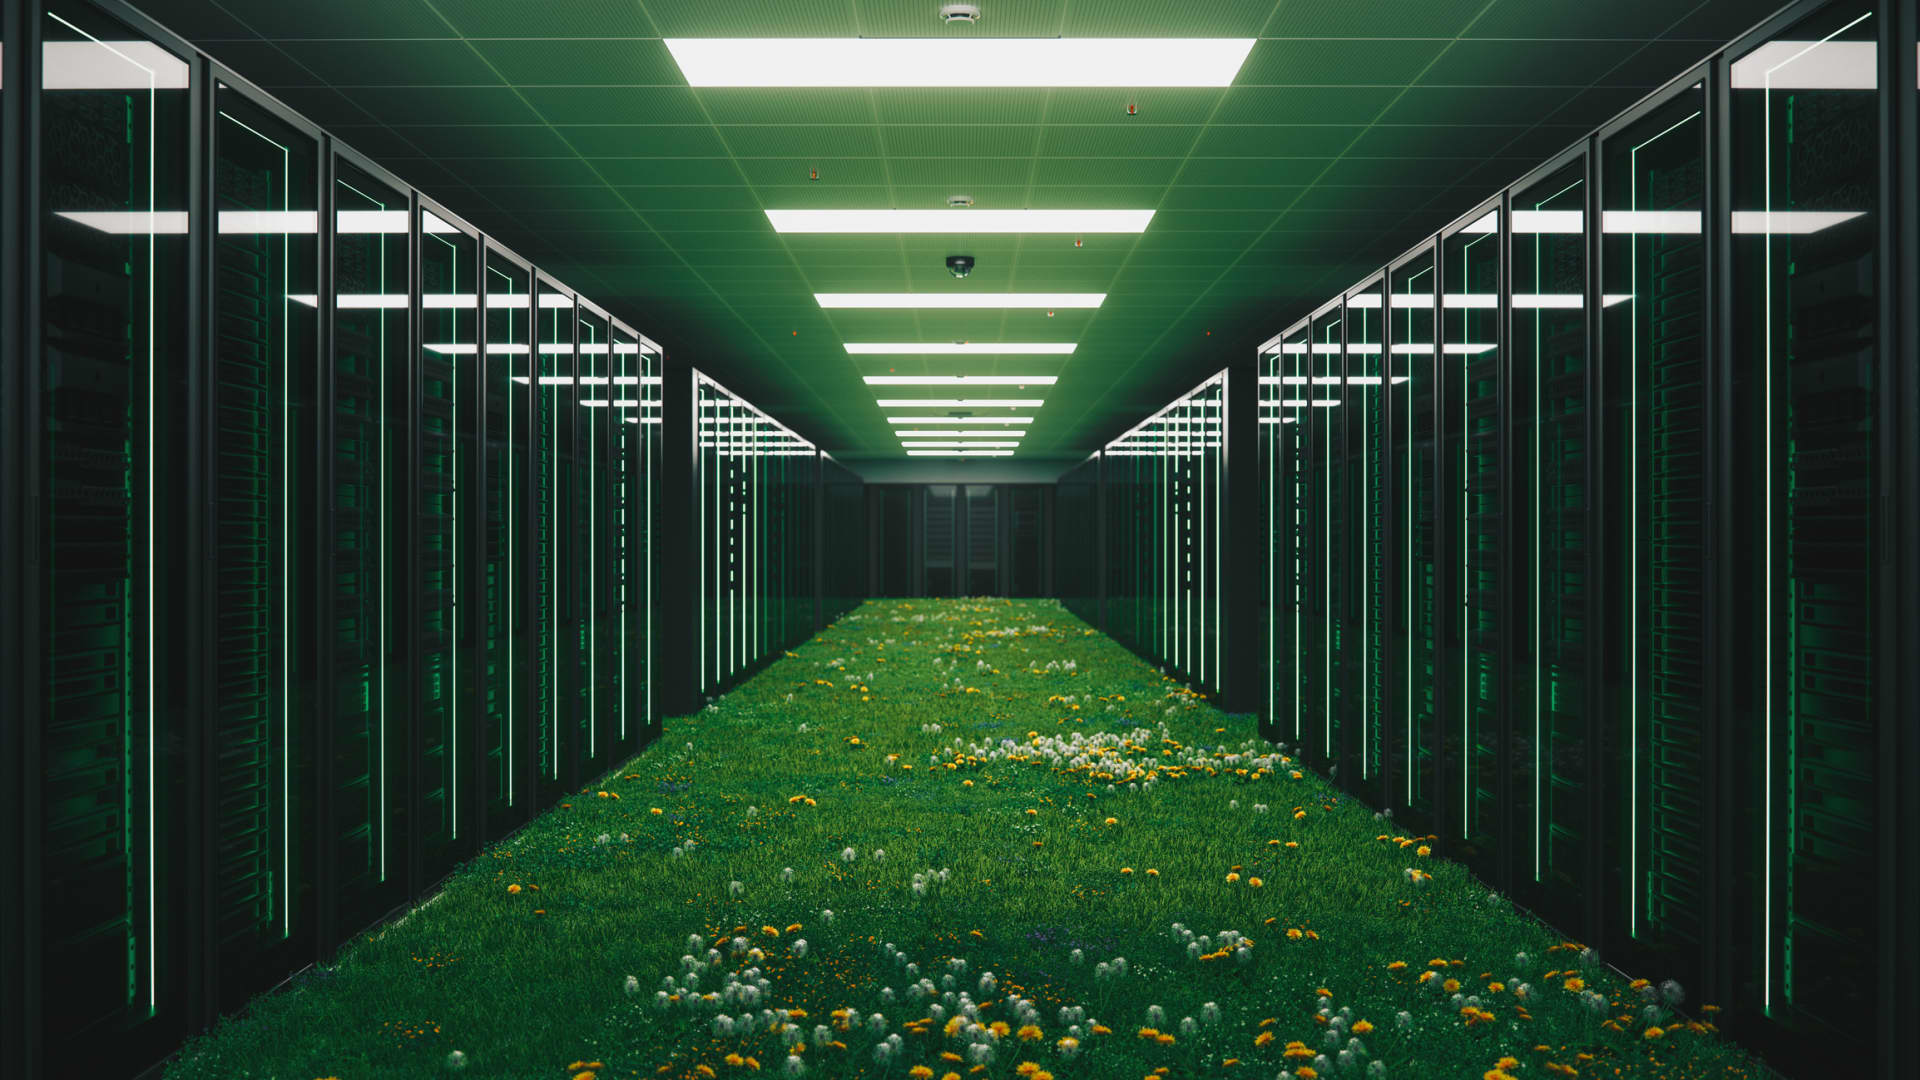 Green data centers help increase green investment in Southeast Asia: Report [Video]